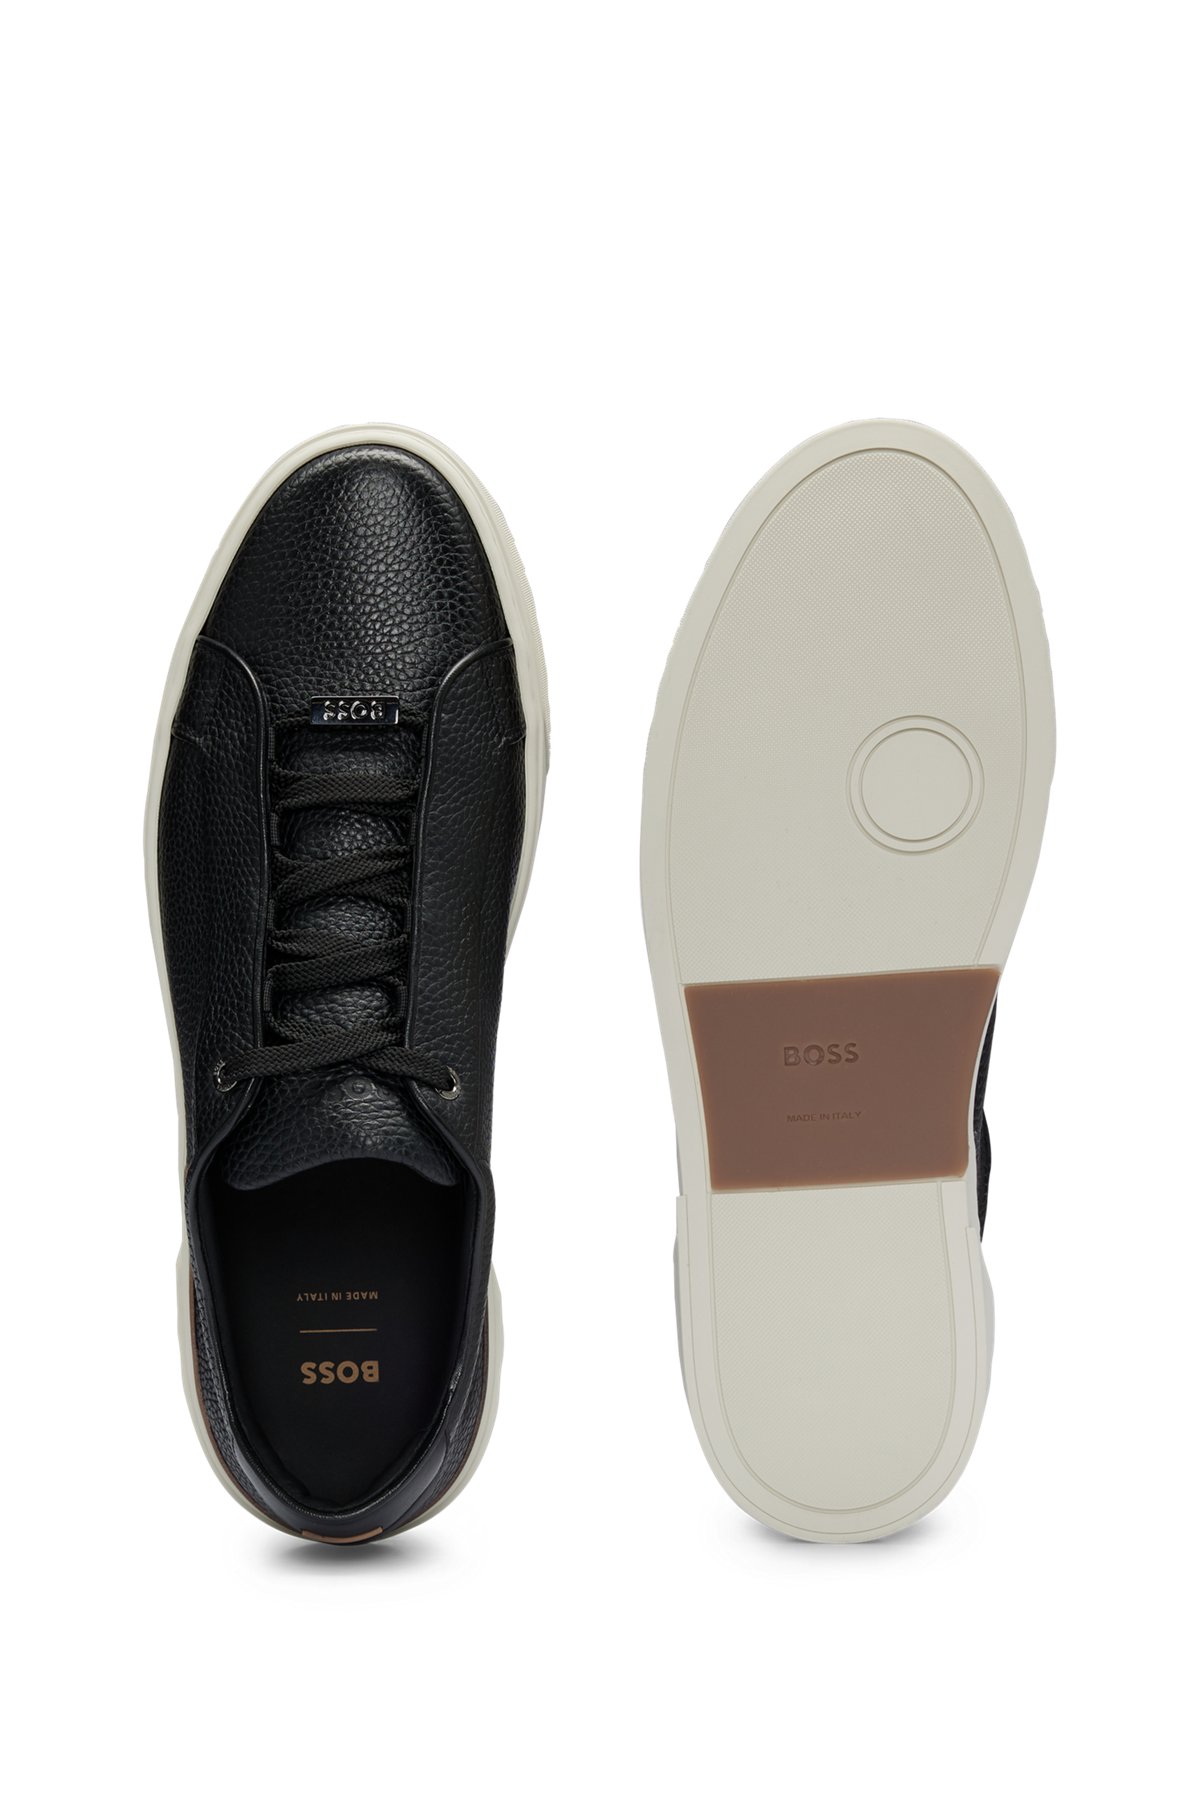 Grained-leather trainers with contrasting details, Black